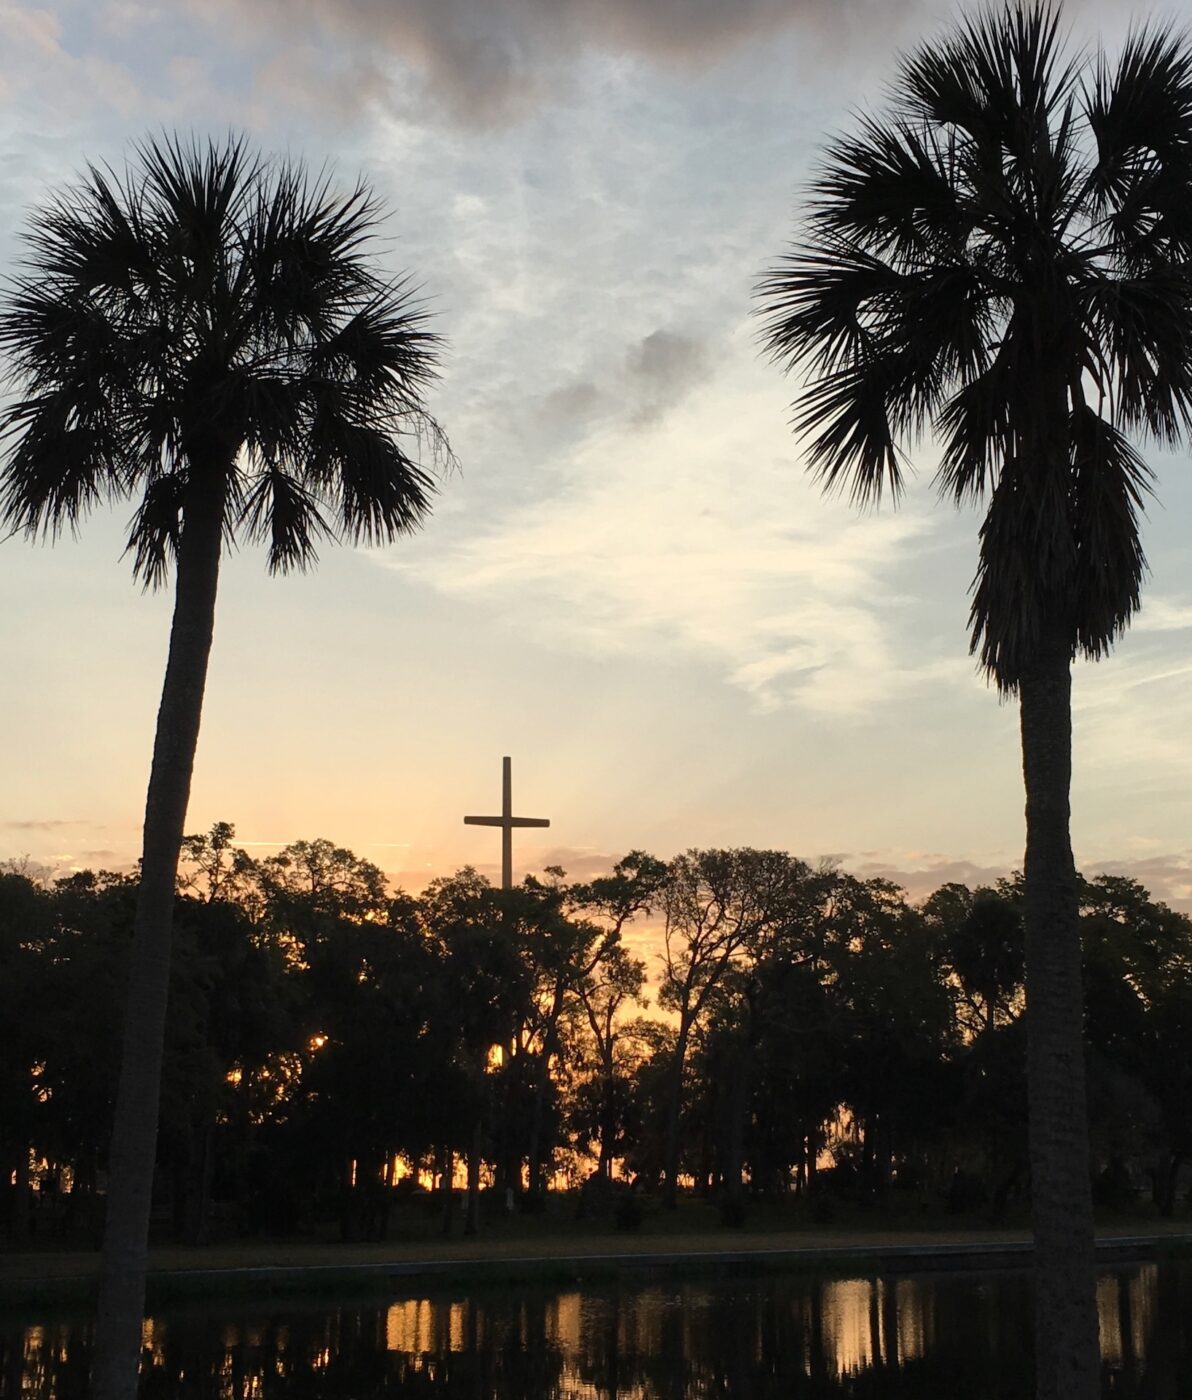 Pictured is a sunrise view of the 200' tall cross on the grounds of the Our Lady of La Leche Shrine in St. Augustine, Fllorida.